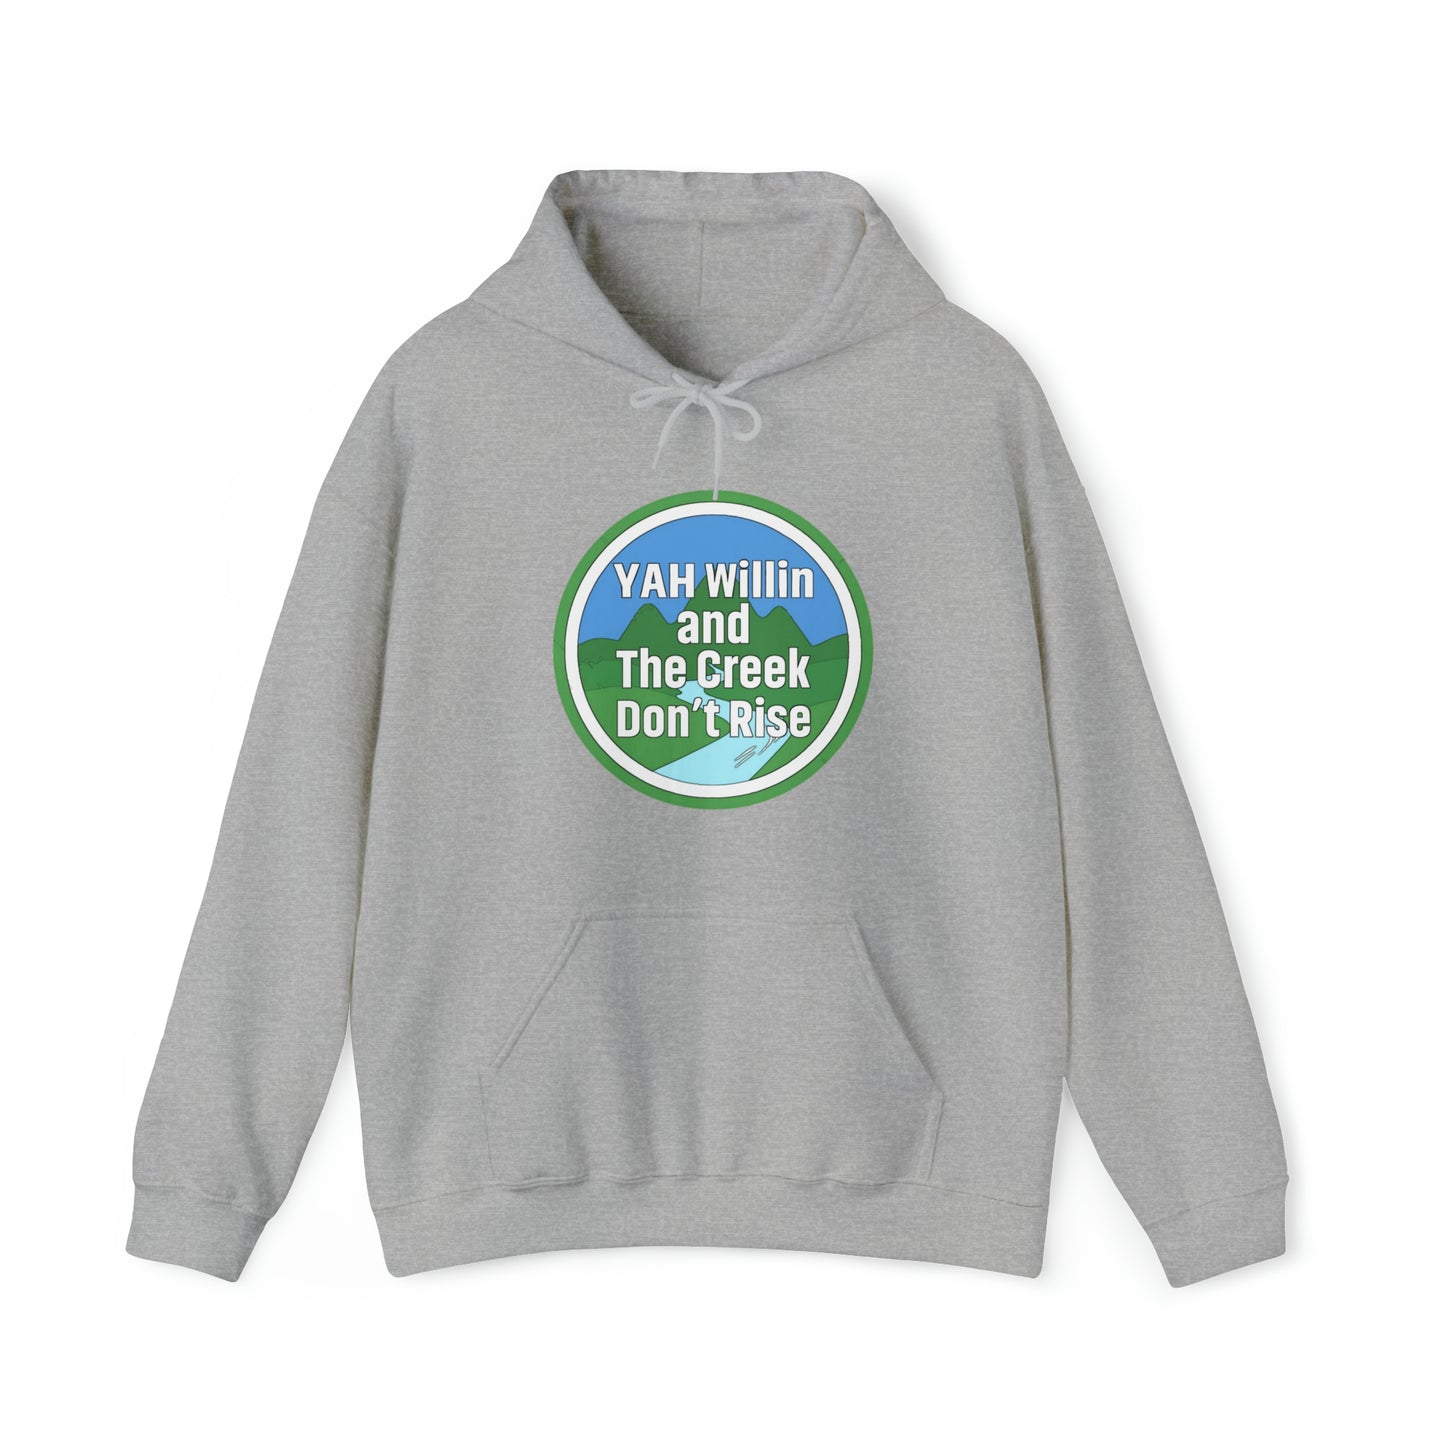 Yah Willin and the Creek Don't Rise Hooded Sweatshirt (Green Pastures Apparel)